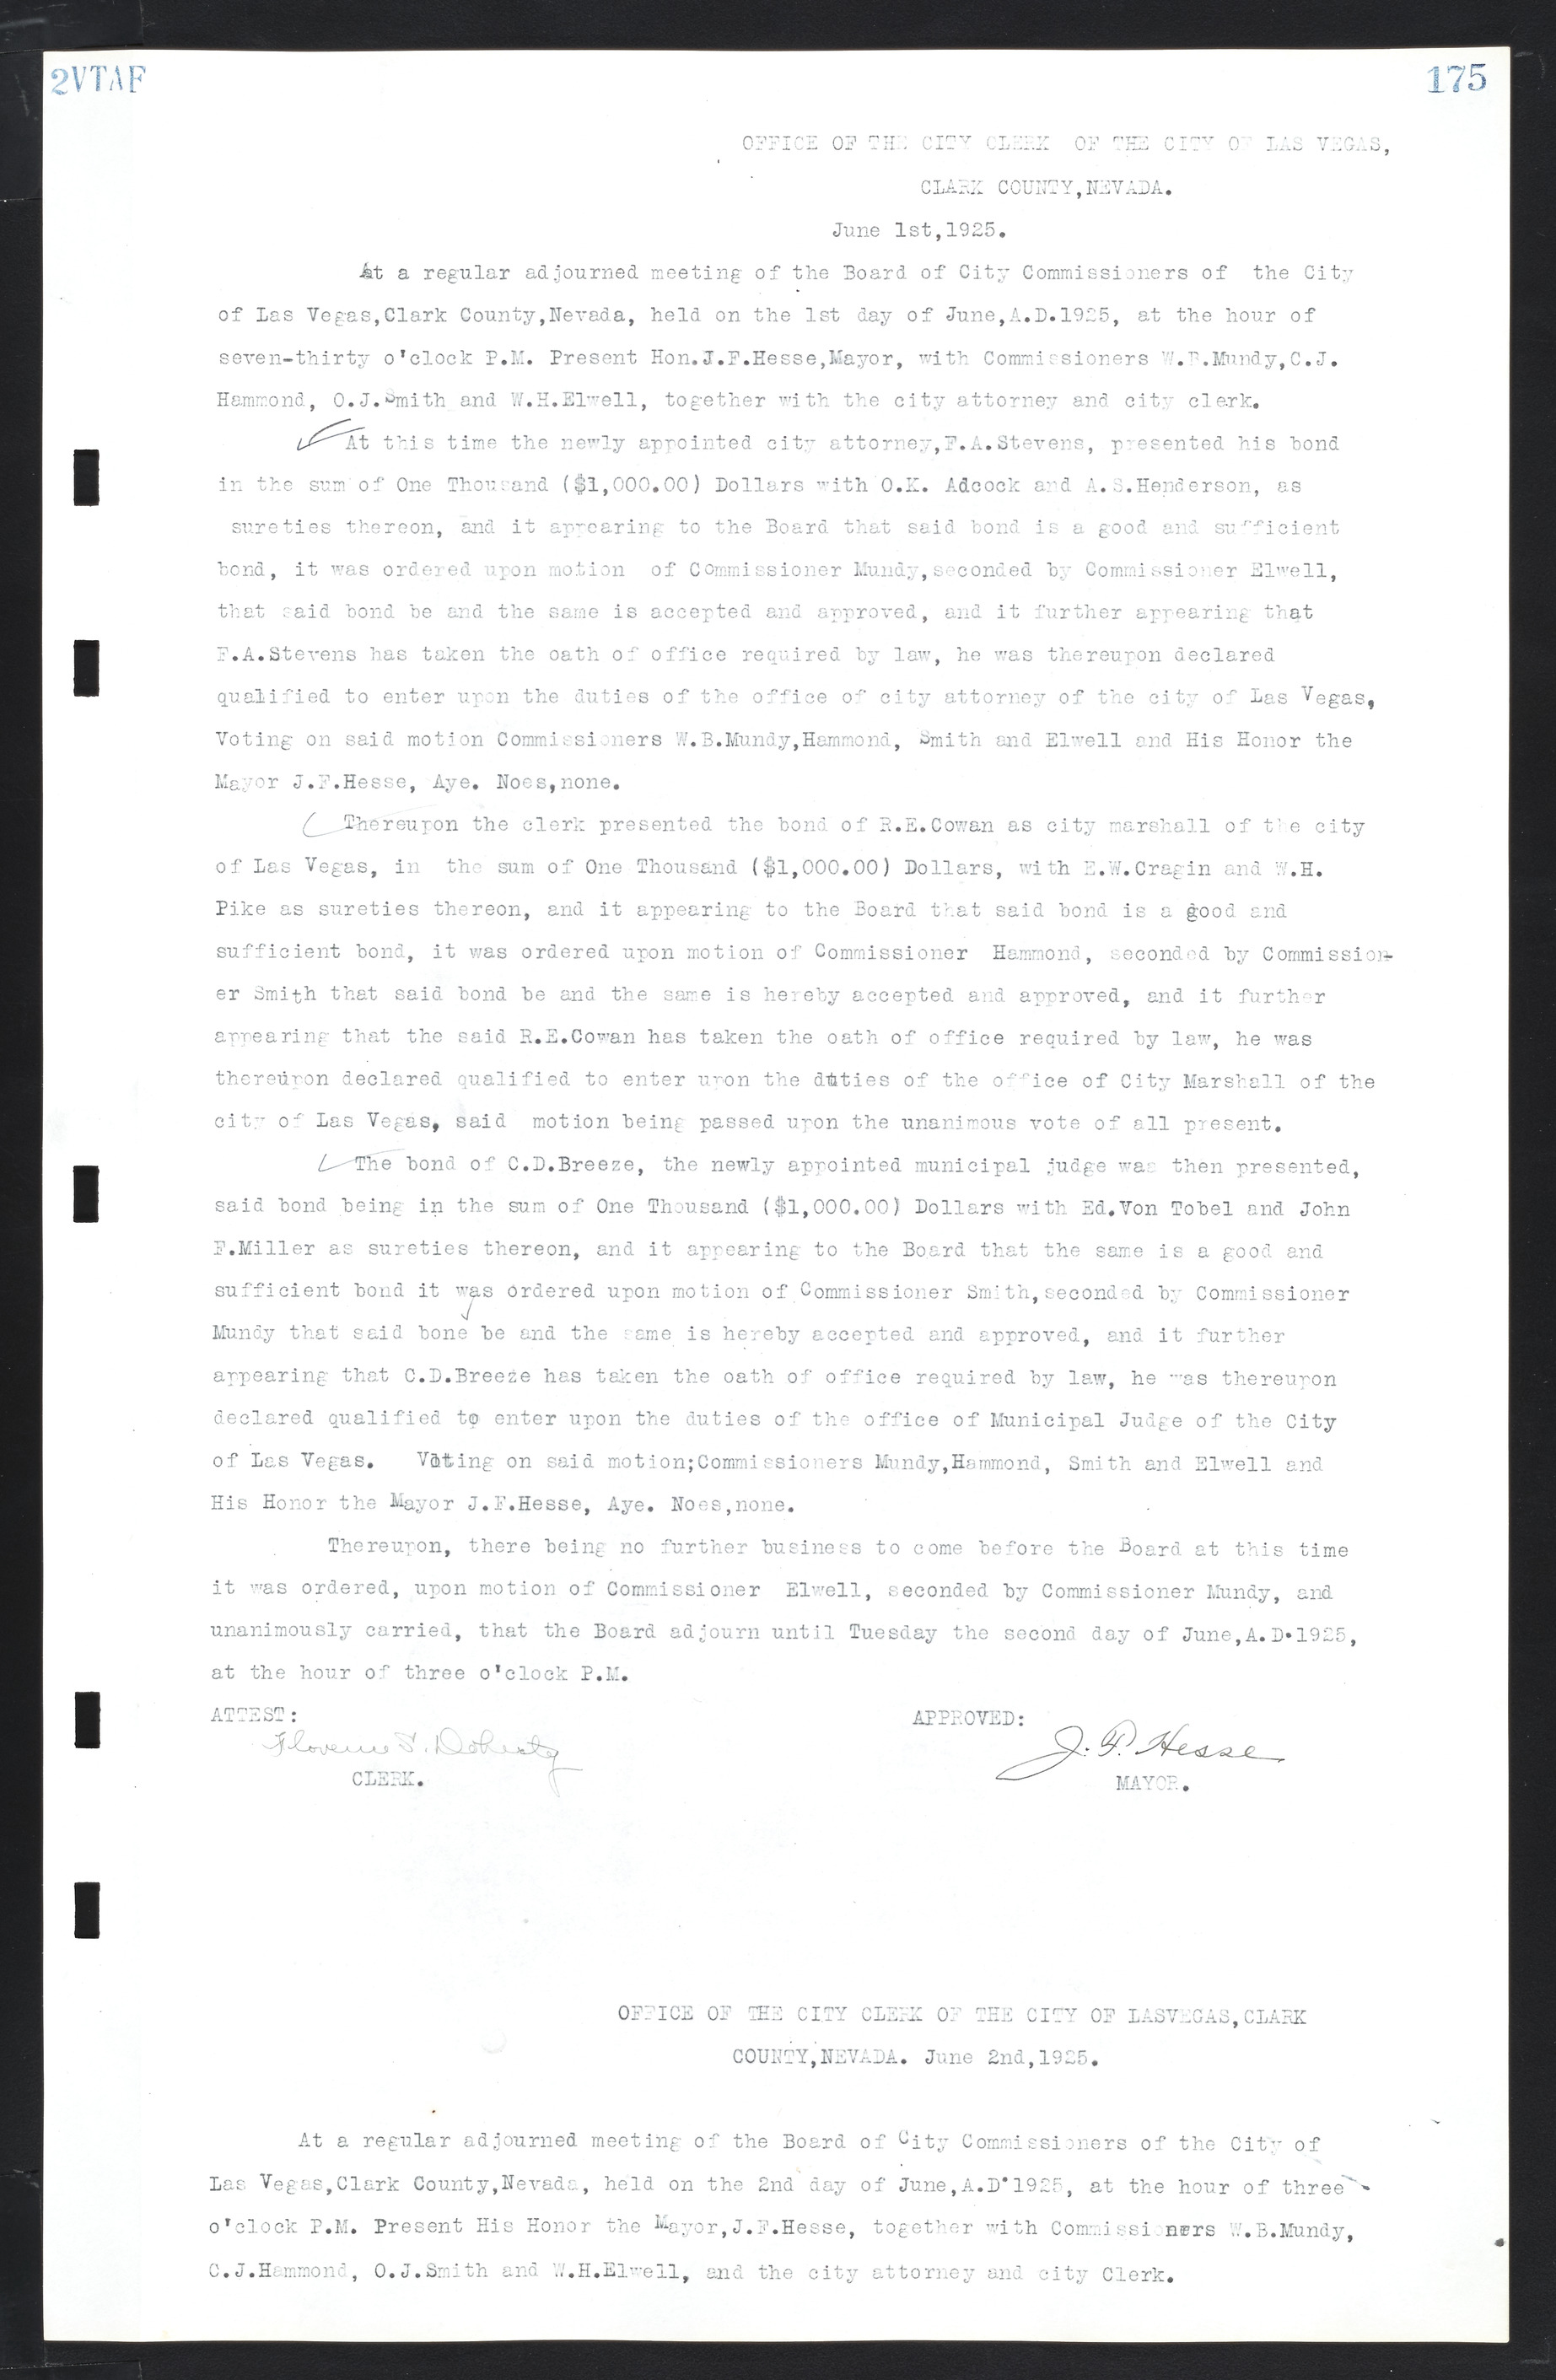 Las Vegas City Commission Minutes, March 1, 1922 to May 10, 1929, lvc000002-182